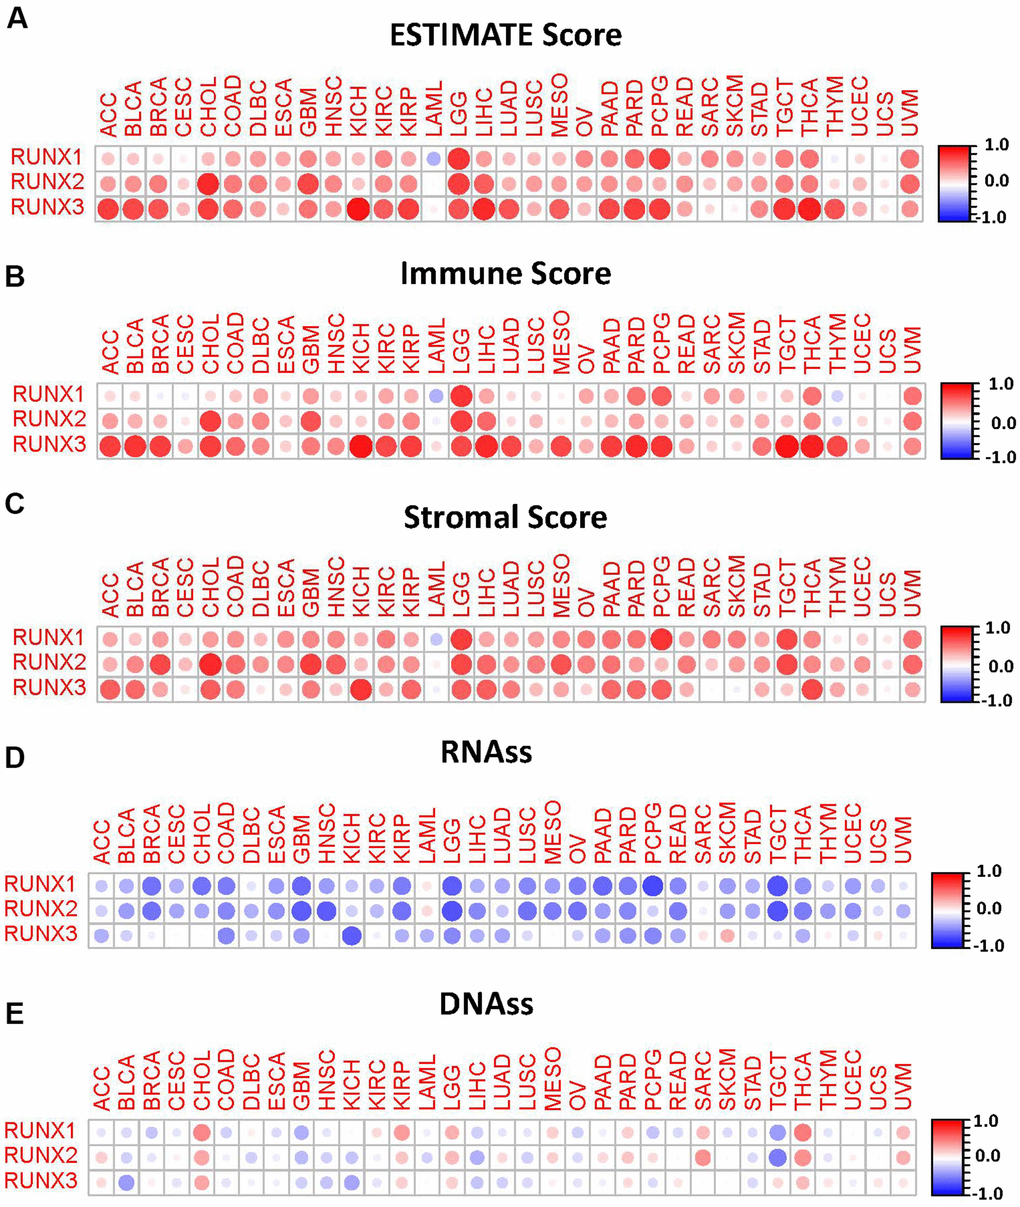 Correlation matrix plots of RUNX gene family gene expression with tumor microenvironment and stemness scores in 33 different cancer types. (A–C) RUNX gene family gene expression was associated with ESTIMATE, immune, and stromal scores in different cancers. (D, E) RUNX gene family gene expression was associated with RNAss and DNAss in different cancers. Spearman’s correlation was used for testing. Red dots indicate a positive correlation between gene expression and immune/stromal score, and blue dots indicate a negative correlation. The size of each dot represents the absolute value of the correlation coefficient.